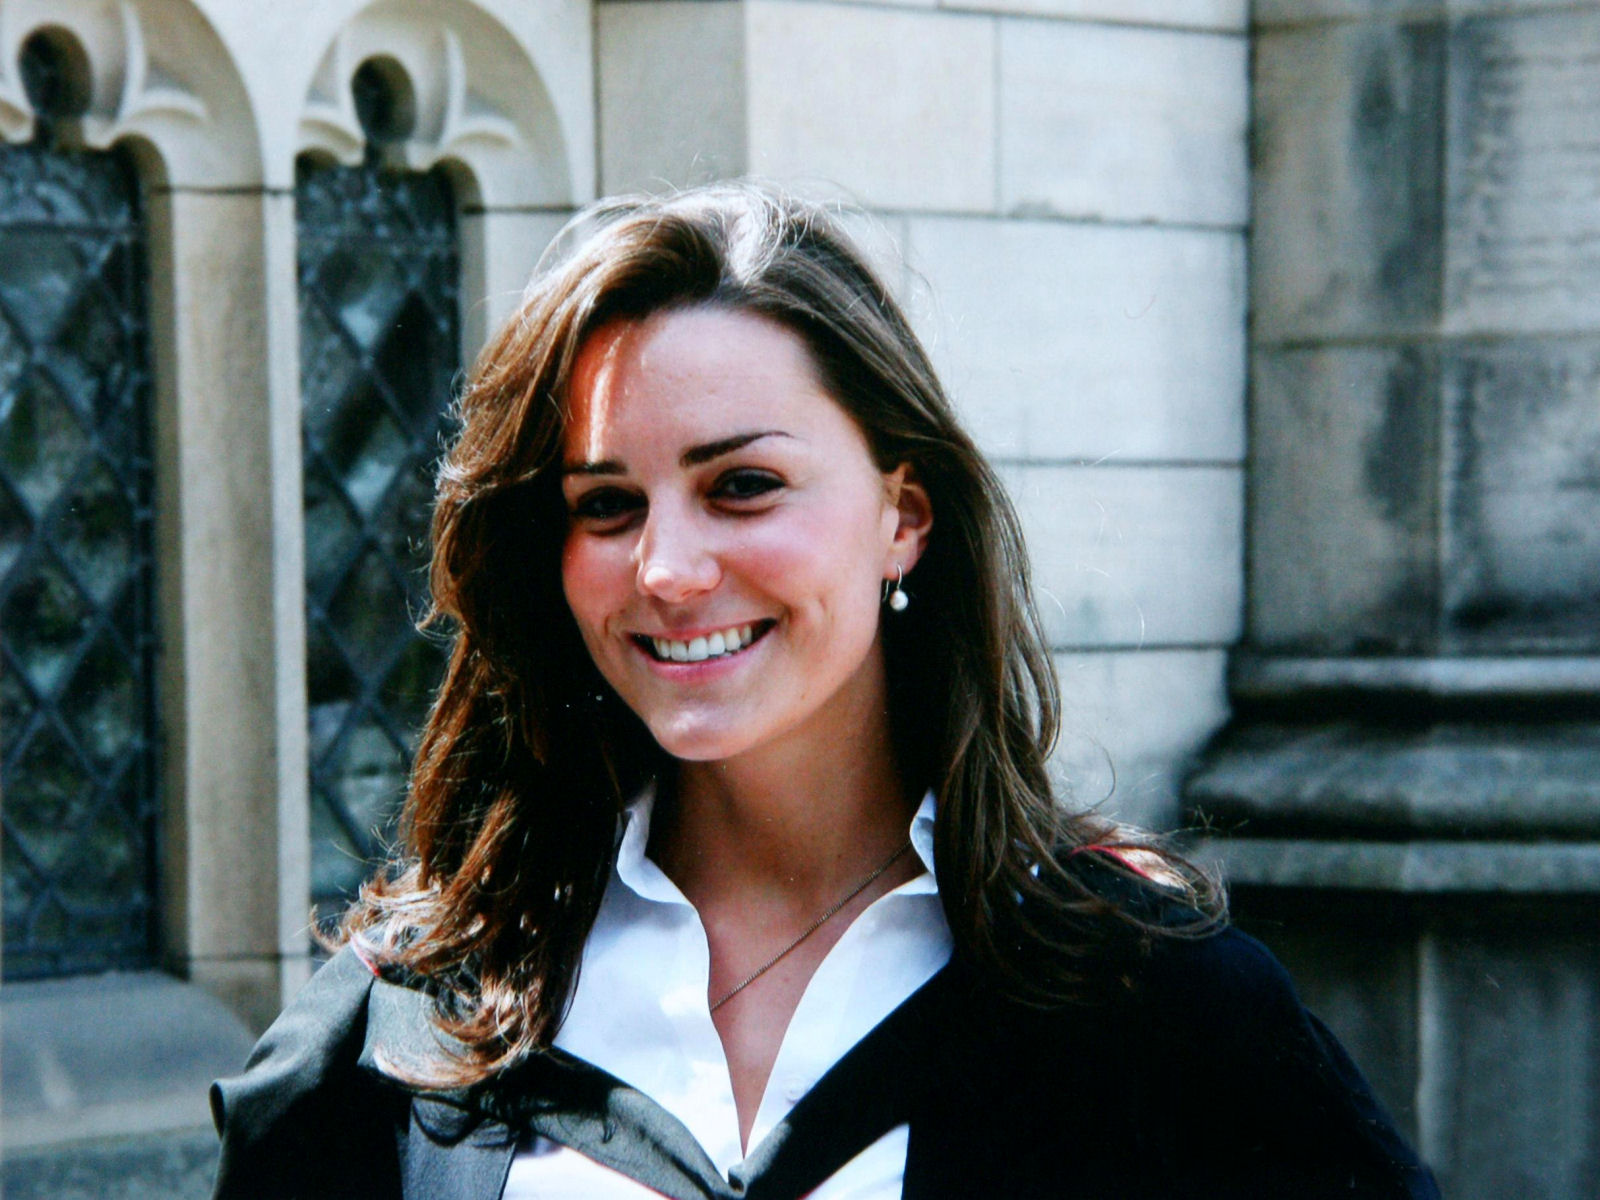 Kate Middleton Wallpaper |Clickandseeworld is all about Funny|Amazing ...